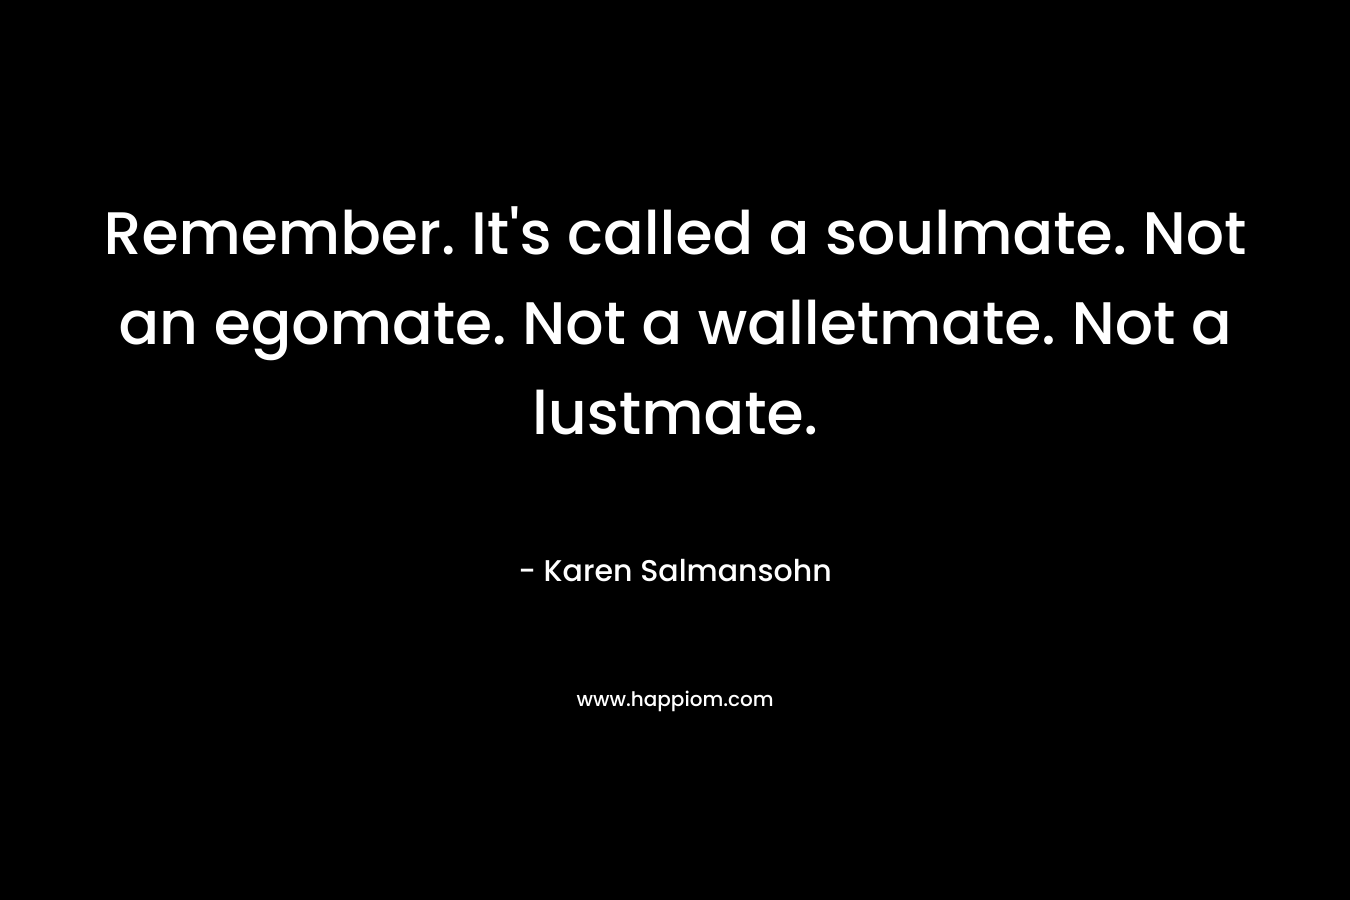 Remember. It's called a soulmate. Not an egomate. Not a walletmate. Not a lustmate.